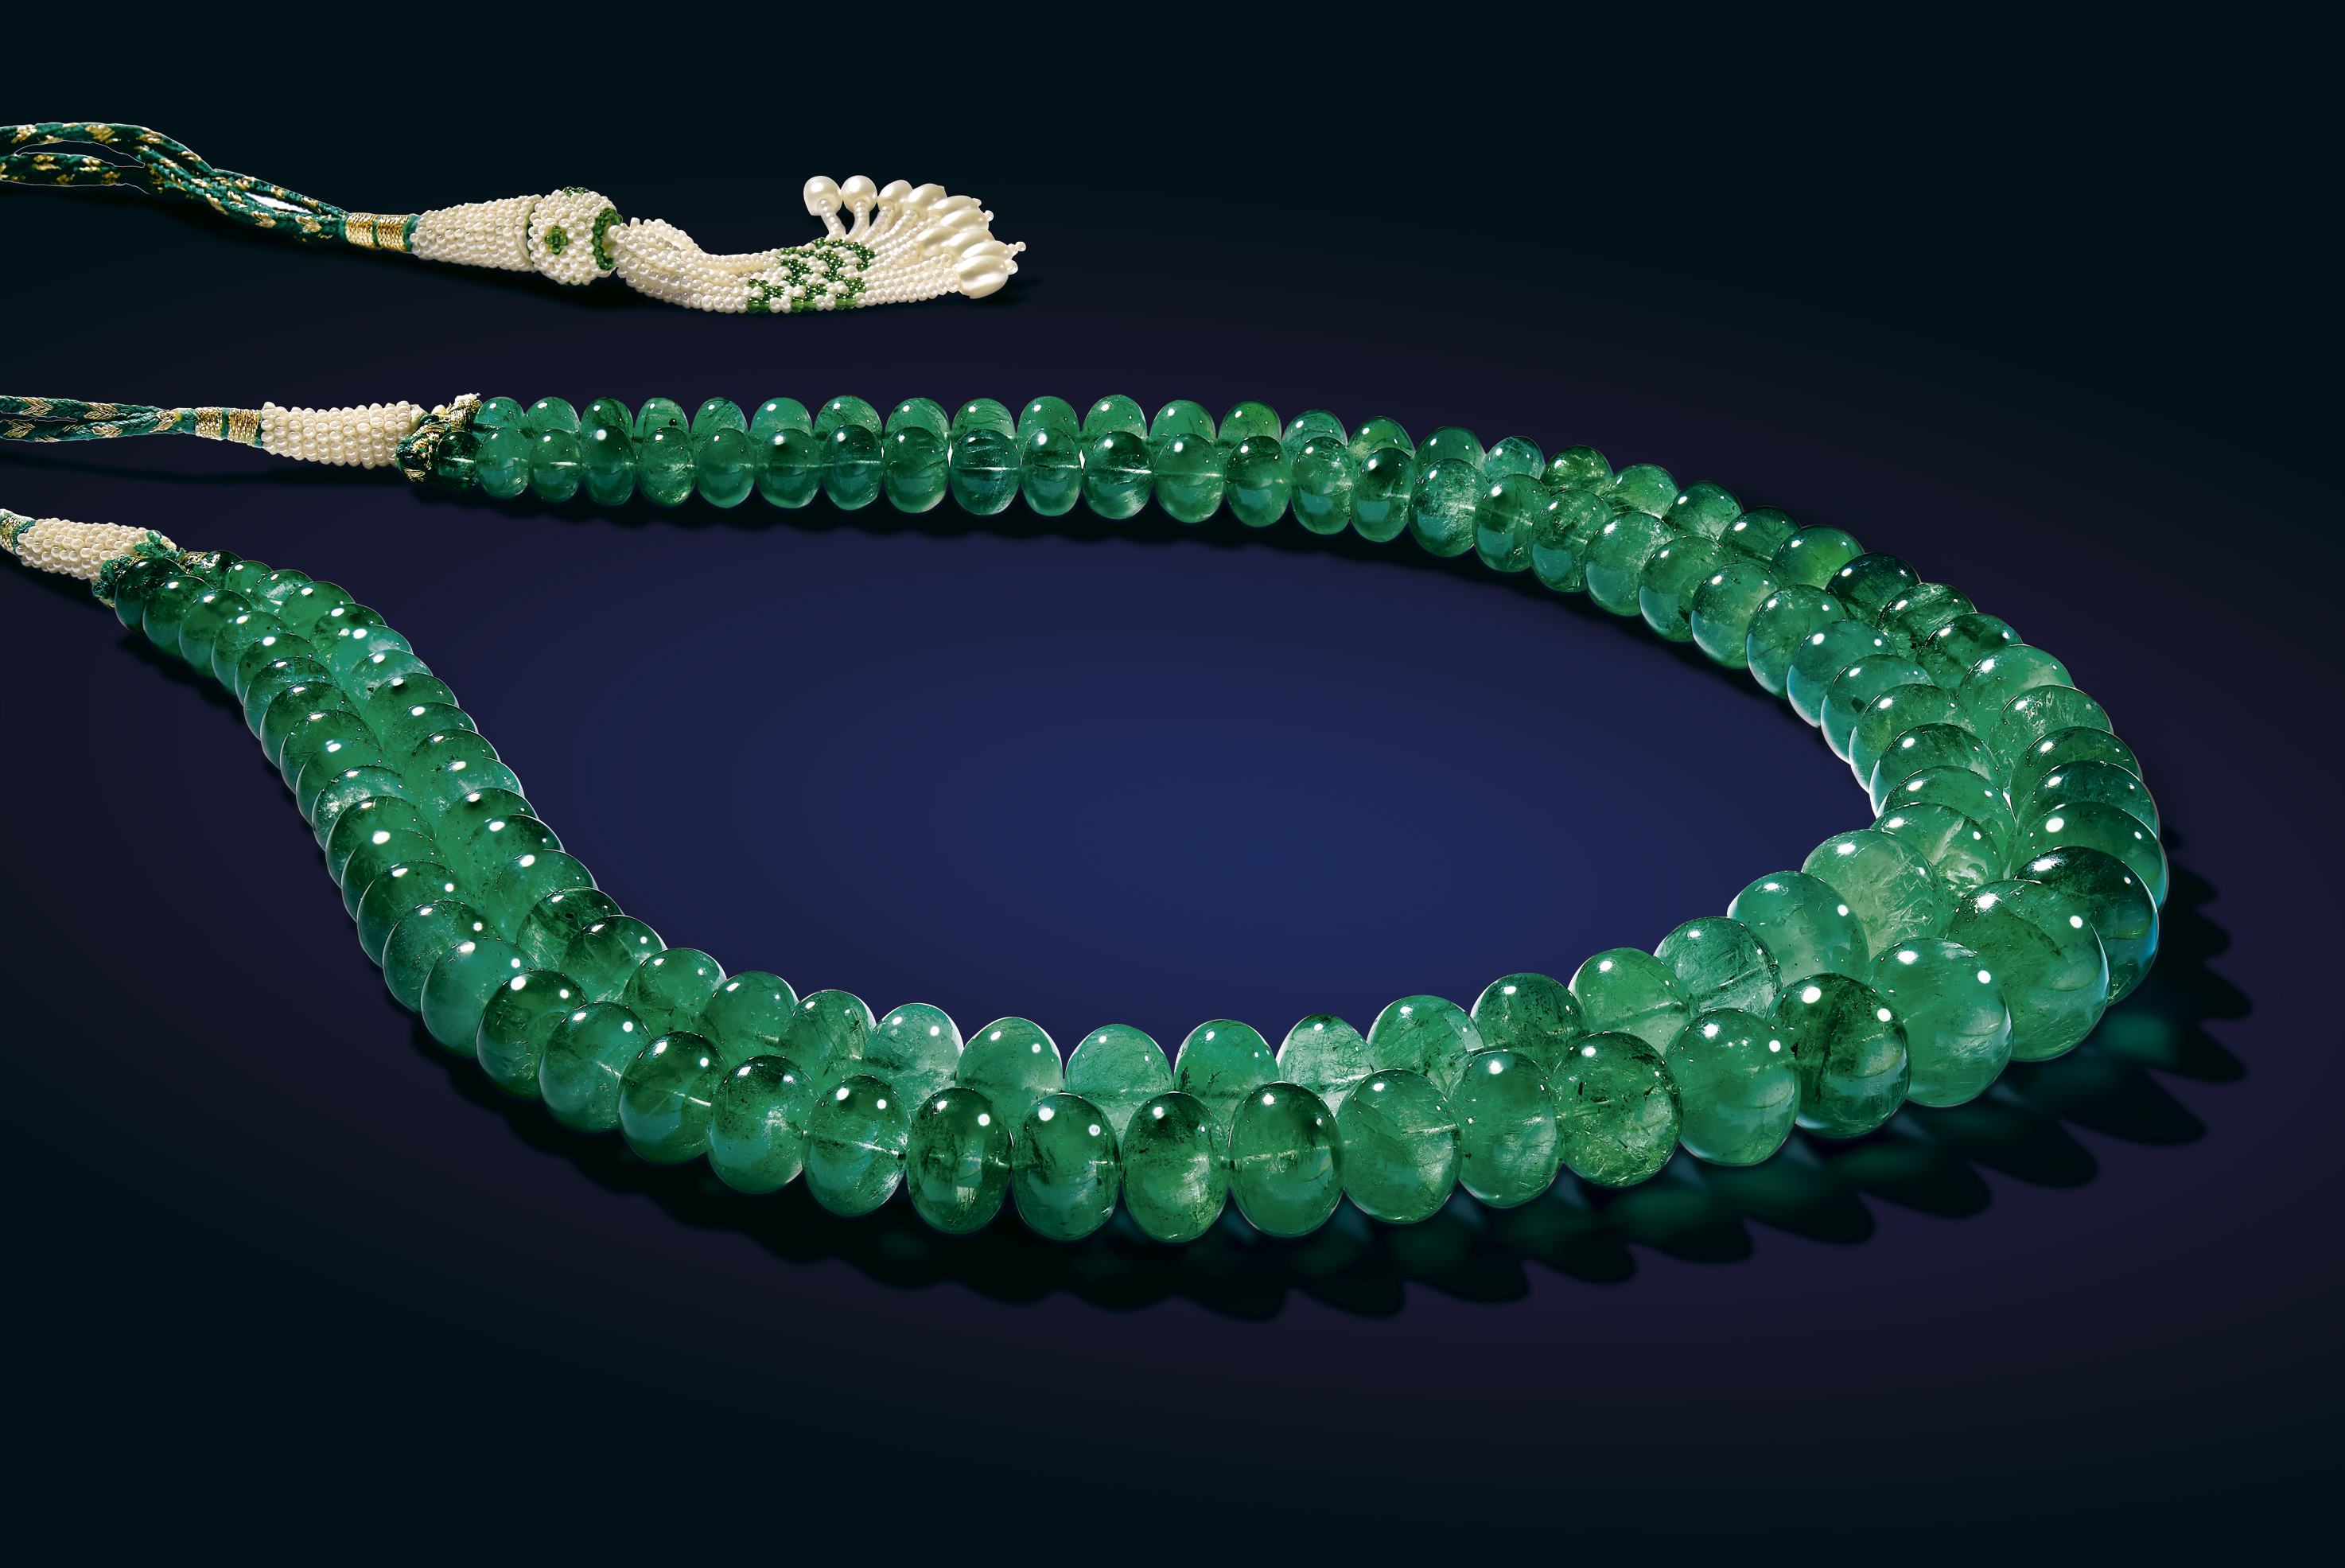 An Important Two Row Zambian Emerald Bead Necklace, Winning Bid - Inr 1,37,65,500, Sold At Astaguru's Heirloomg Auction In Oct 2021.